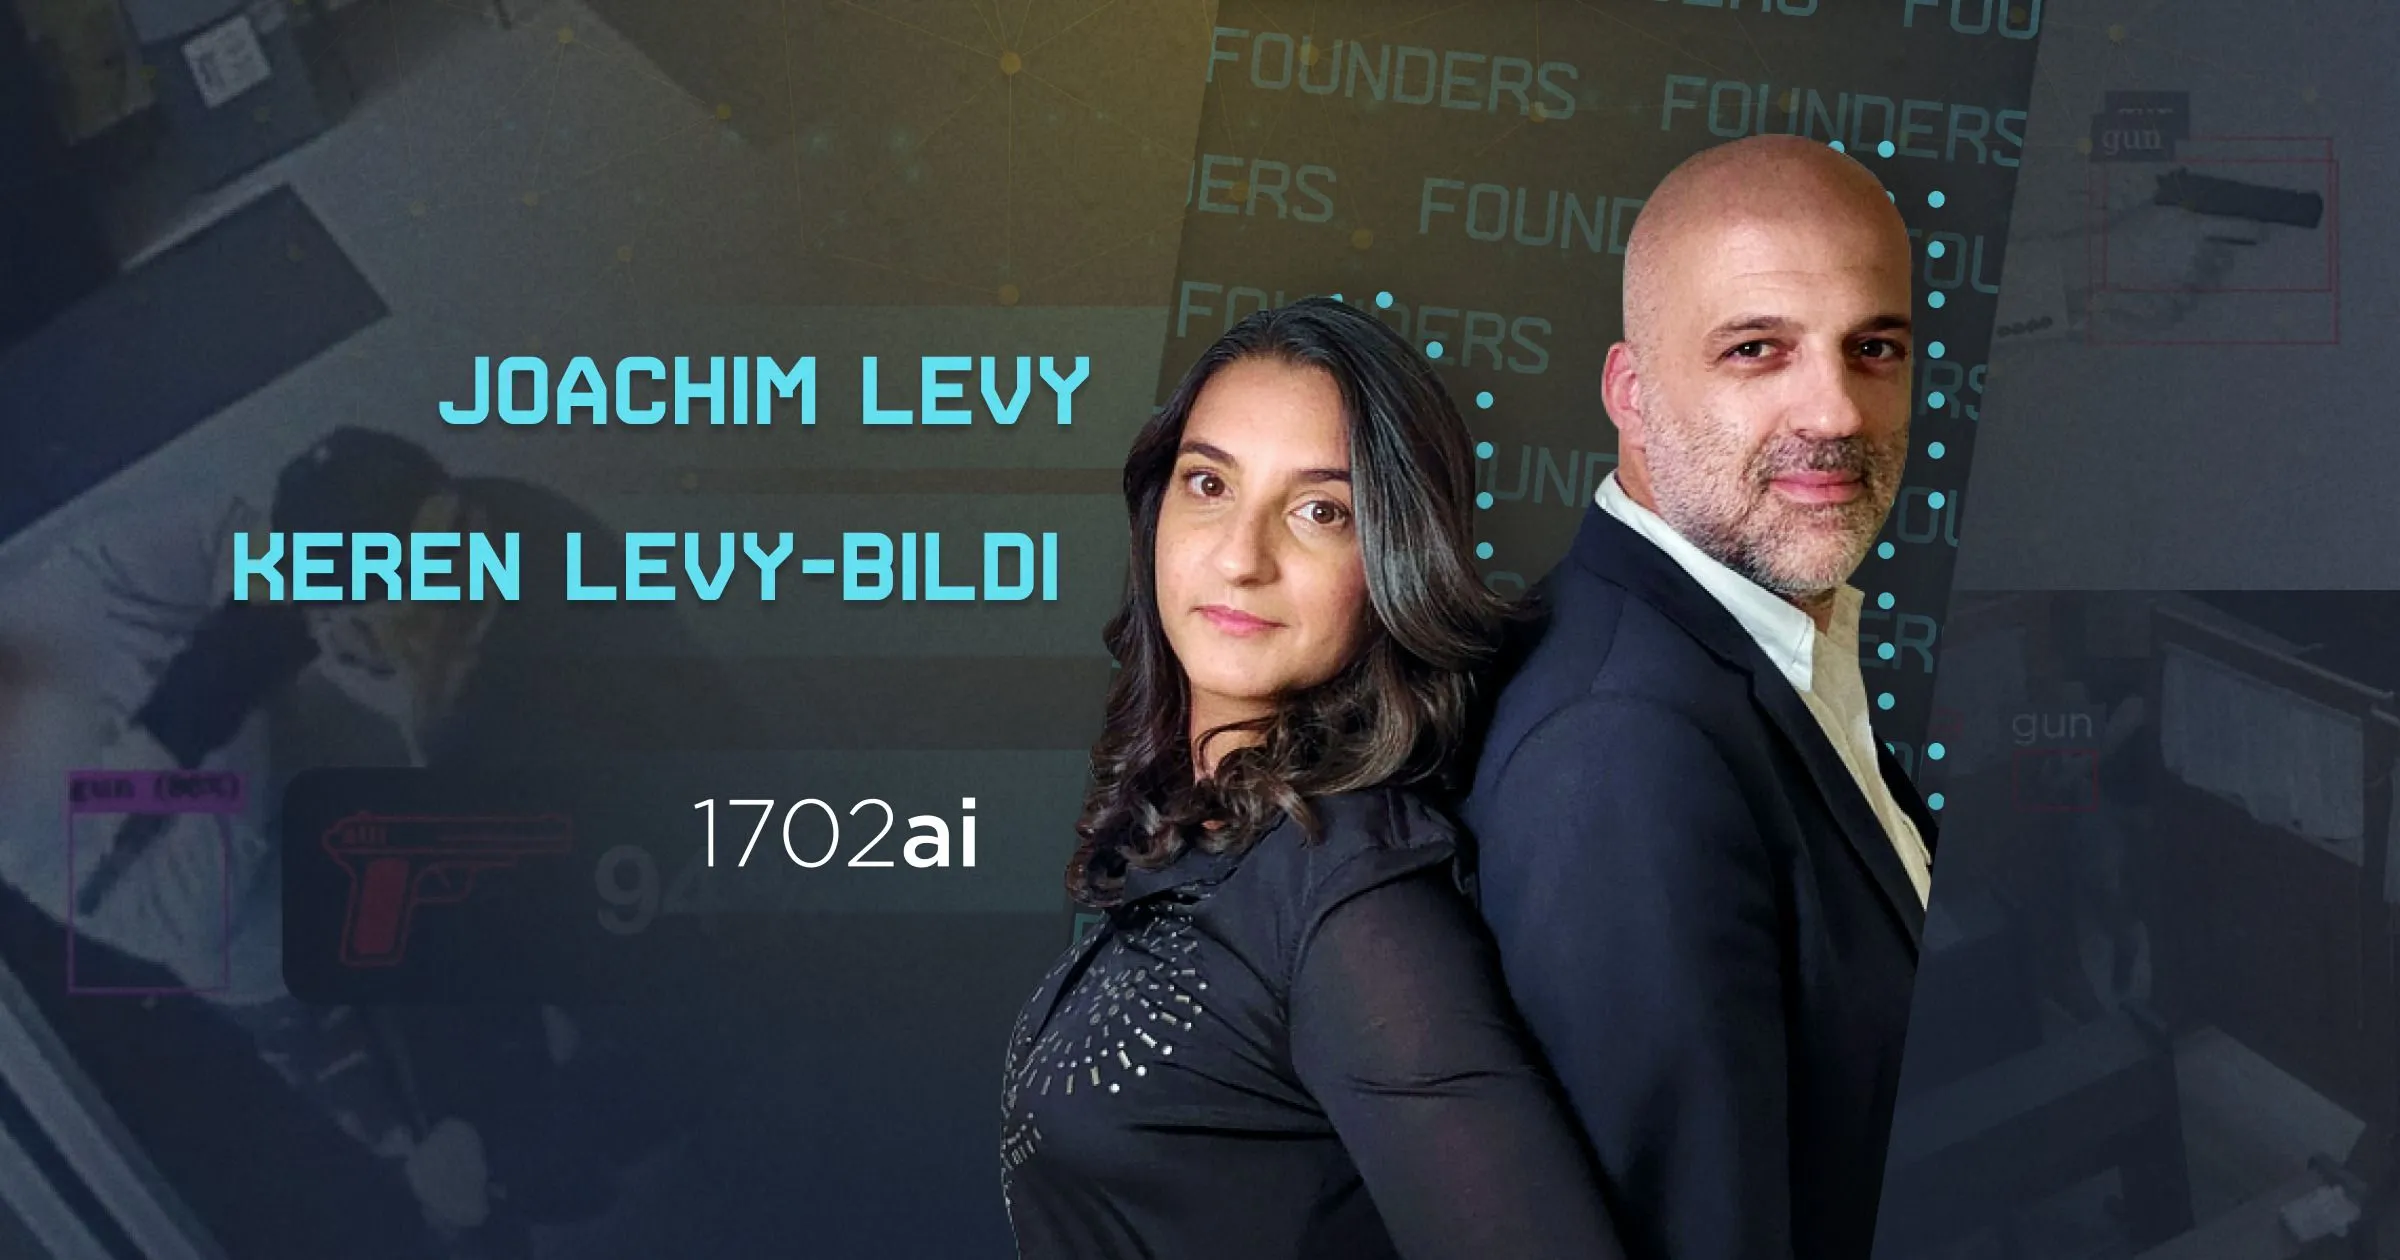 1702ai Co-Founders Joachim Levy and Keren Levy-Bildi: Weapon Detection with AI